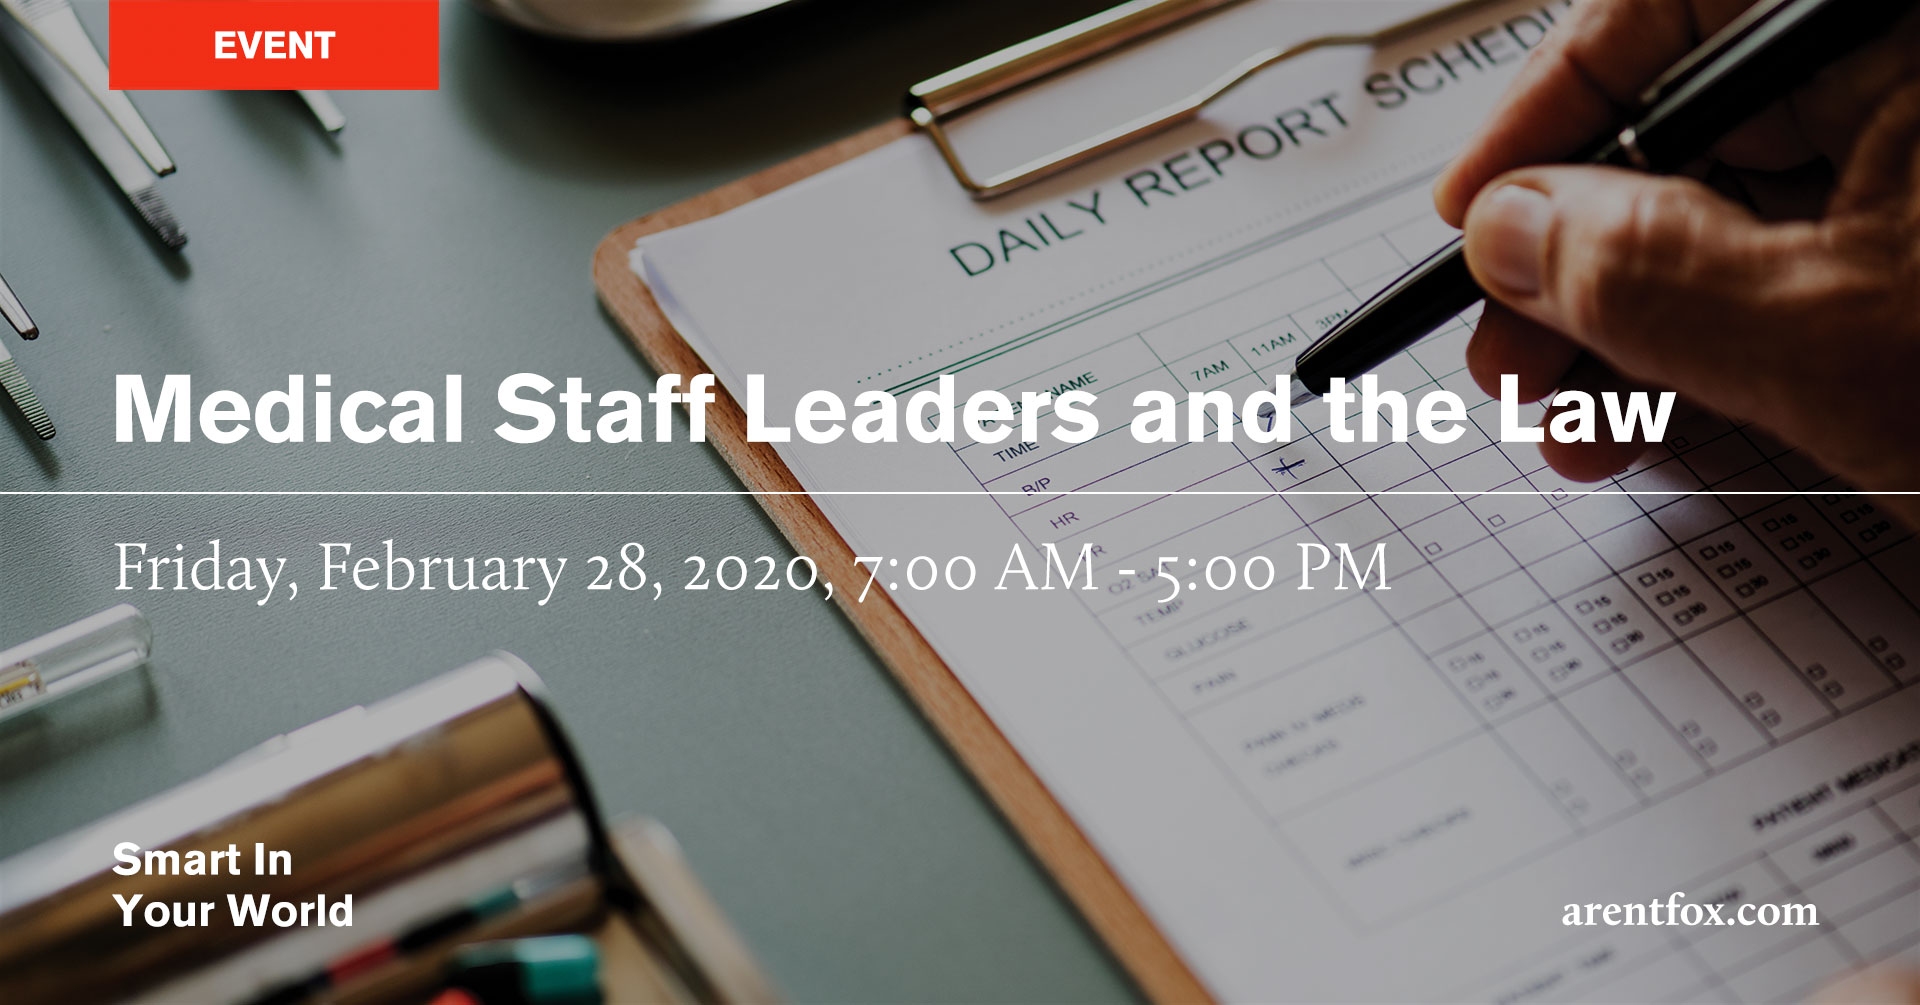 Medical Staff Leaders and the Law Conference 2020